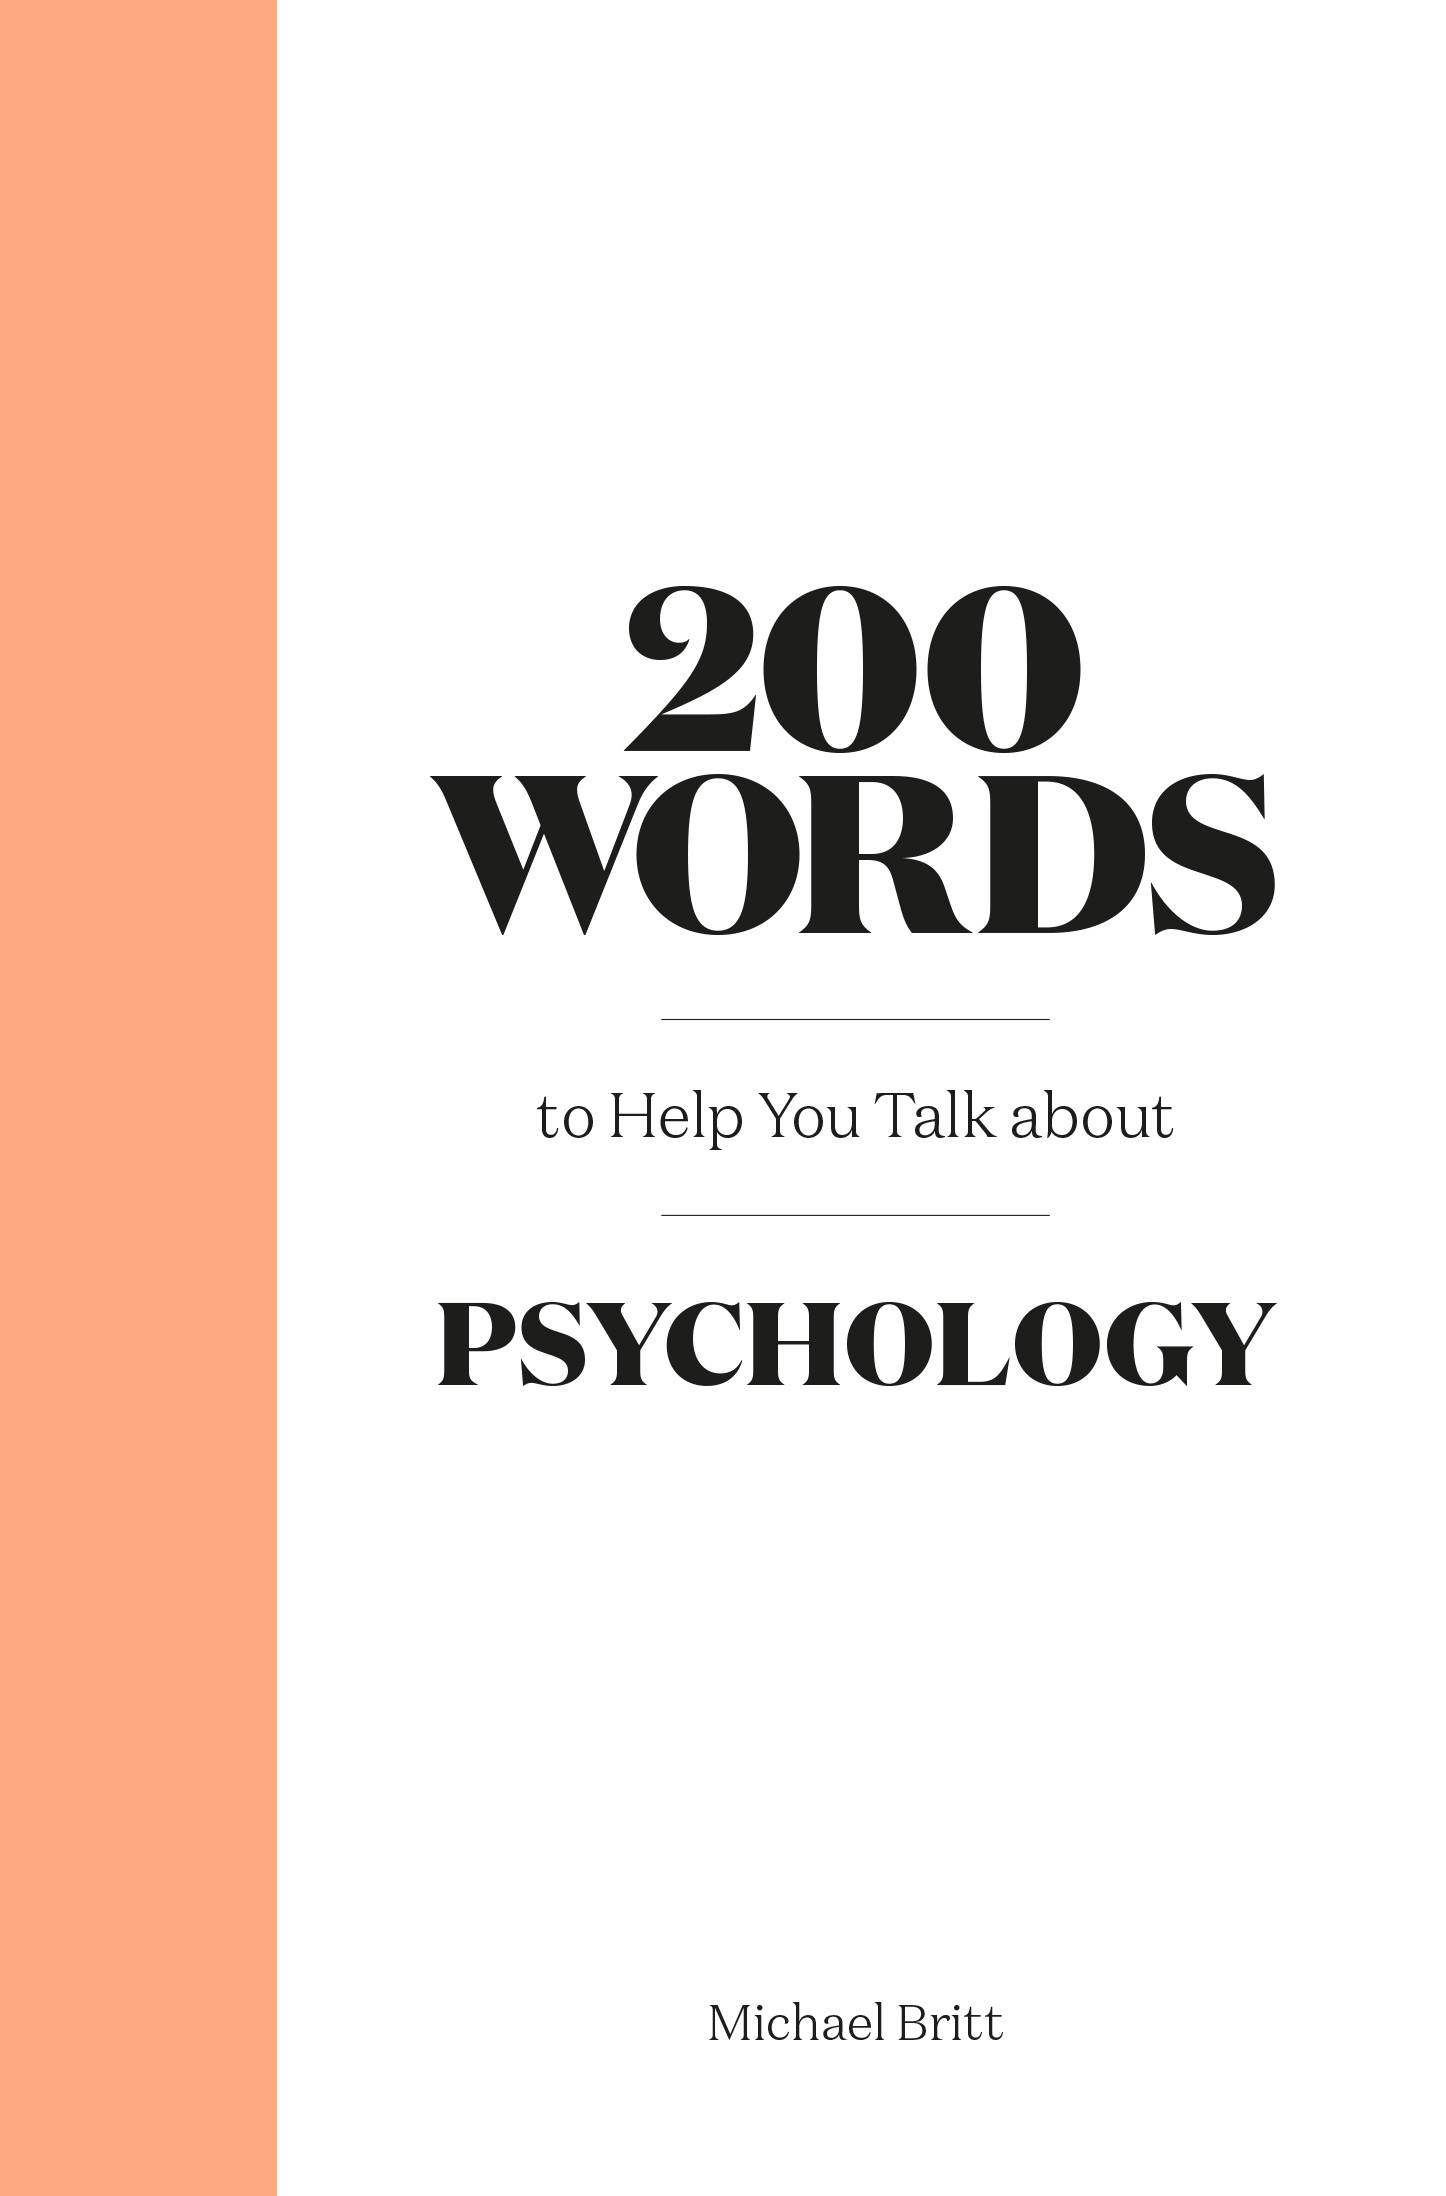 200 Words to Help You Talk About Psychology | Michael Britt